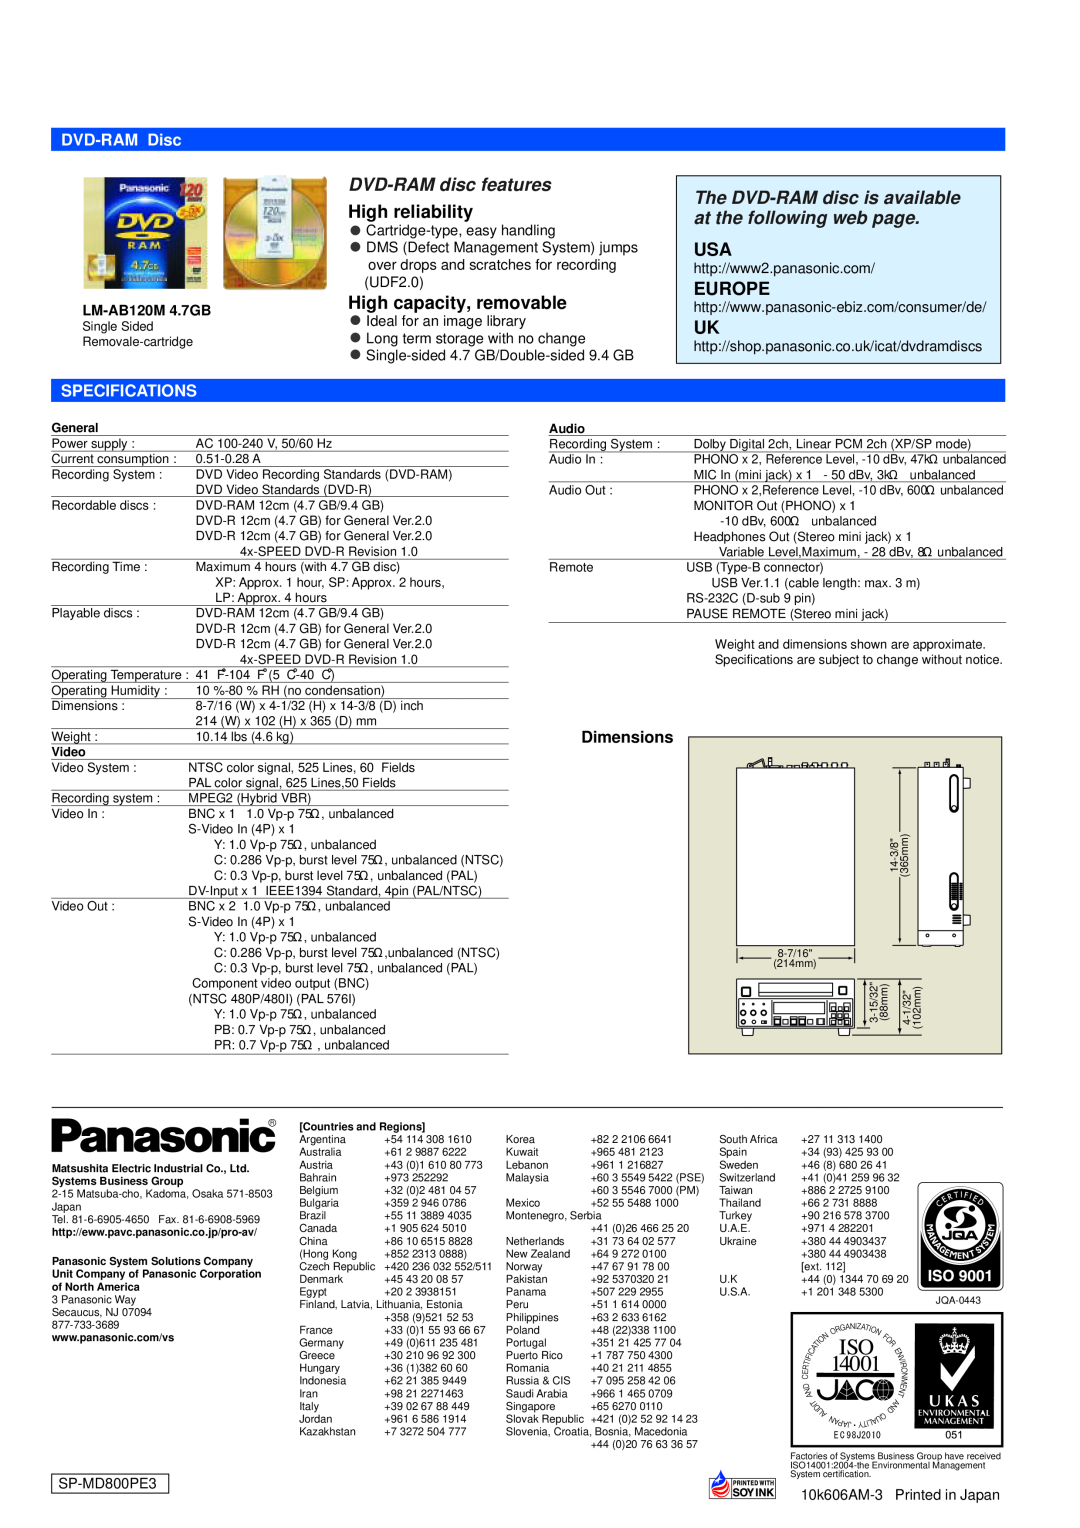 Panasonic LQ-MD800 DVD-RAM disc features, High reliability, High capacity, removable, Europe, DVD-RAM Disc, Specifications 